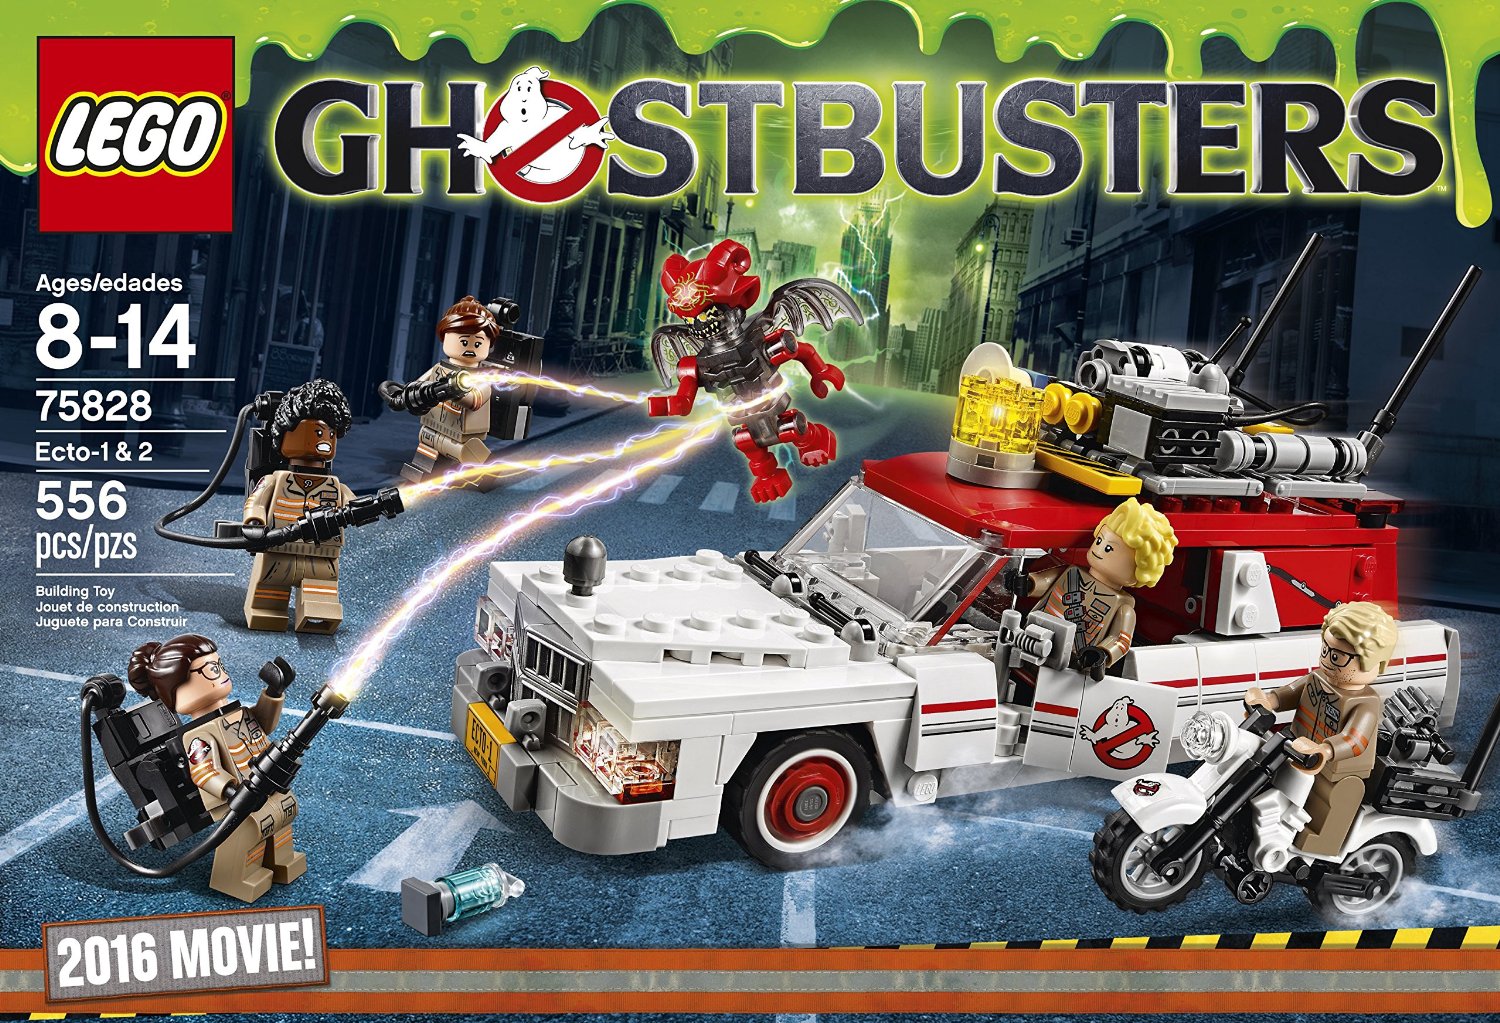 LEGO Shop@Home Update: Lower Free Shipping Minimum, Bonus Points, Ecto-1 & 2  Now Available, - FBTB